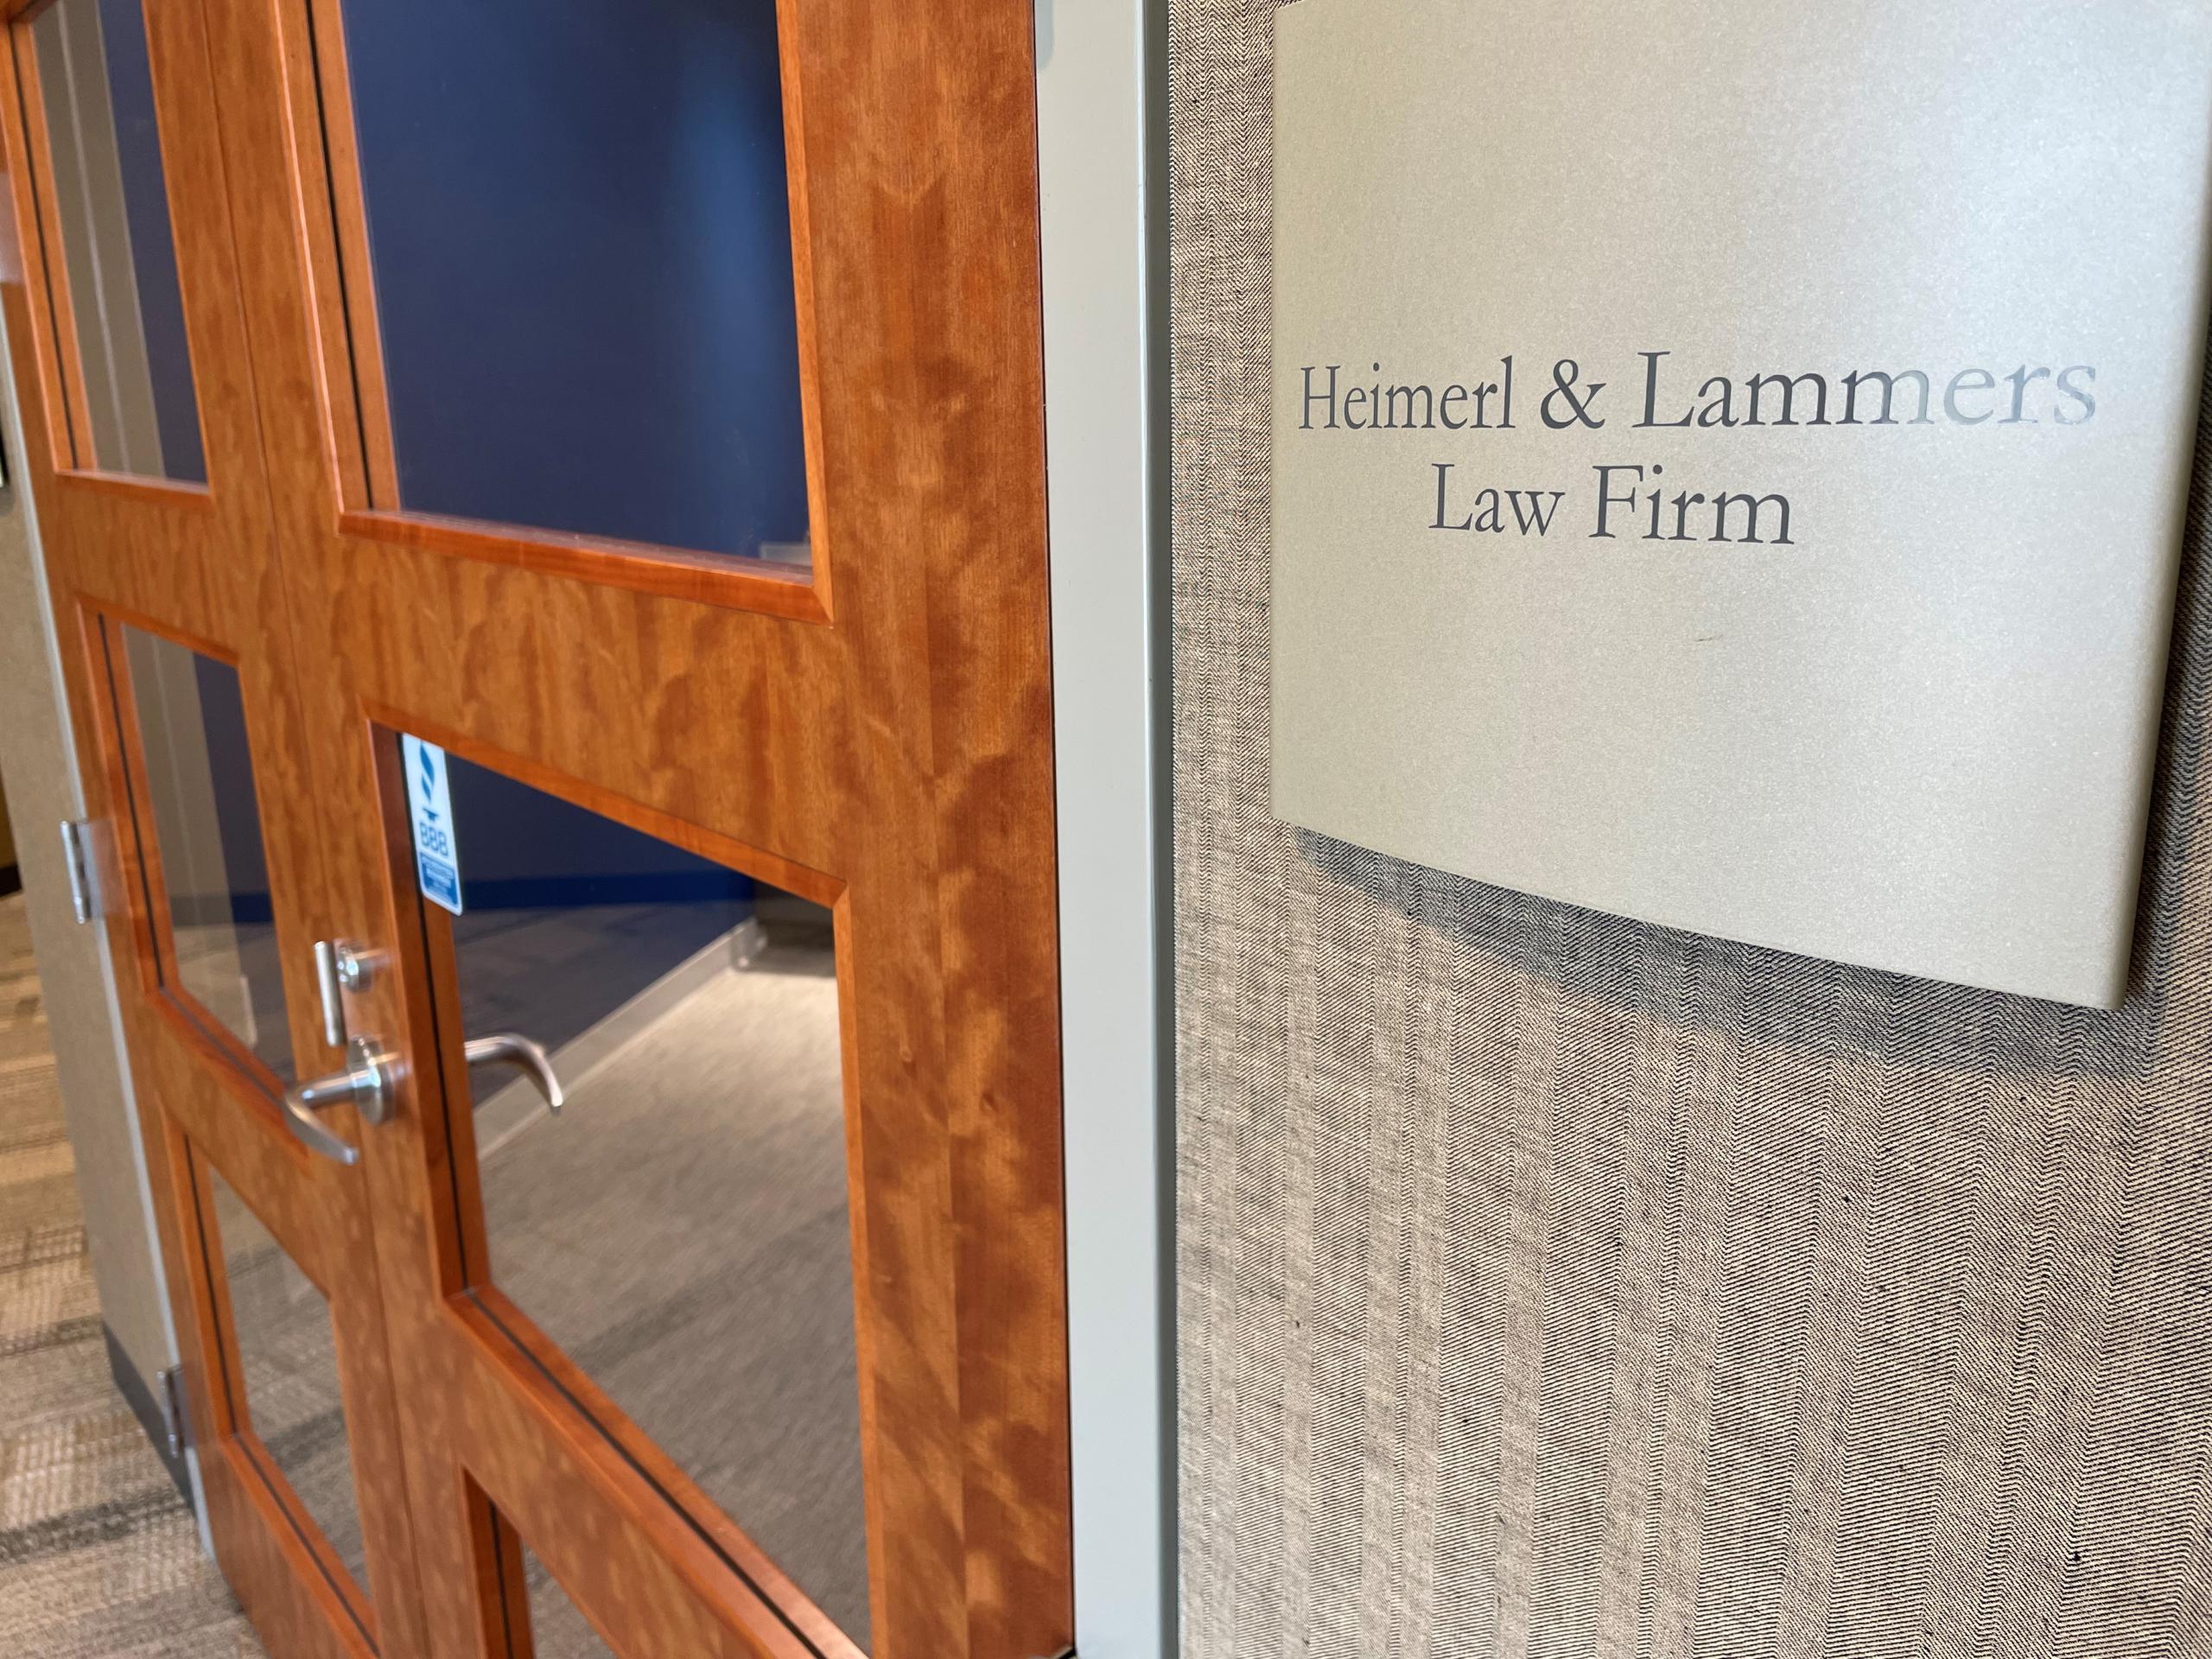 Doors to 612-INJURED and catastrophic injury lawyers